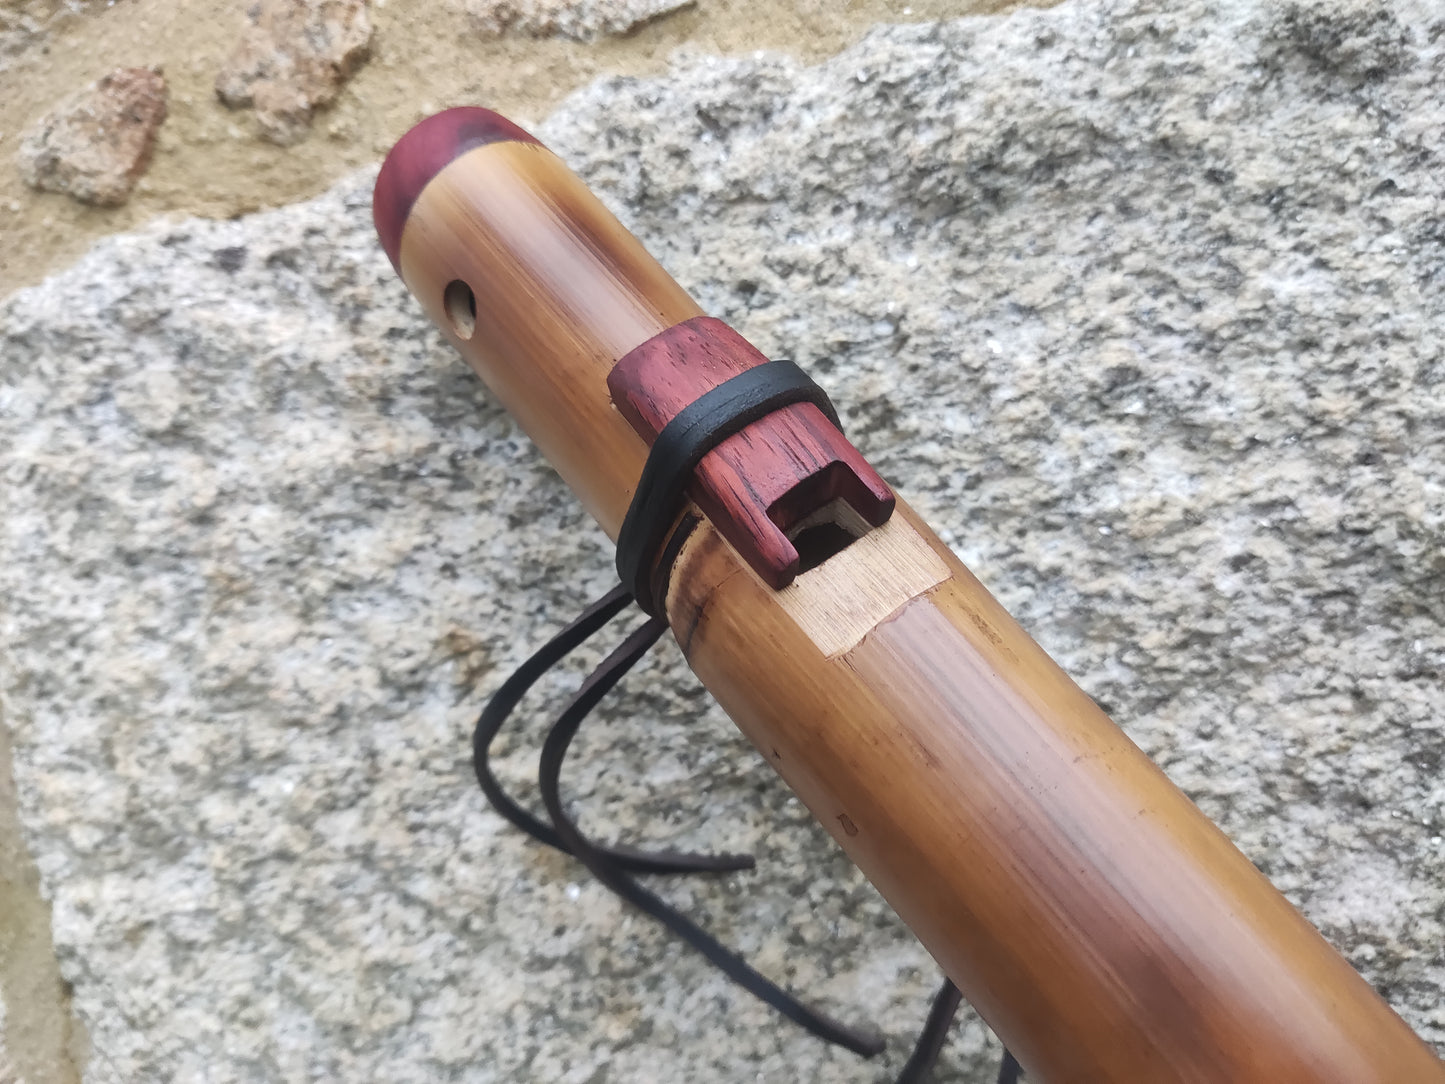 RESERVED FOR Anthony: Low A Akebono Flute built in the Native American Style at A432Hz